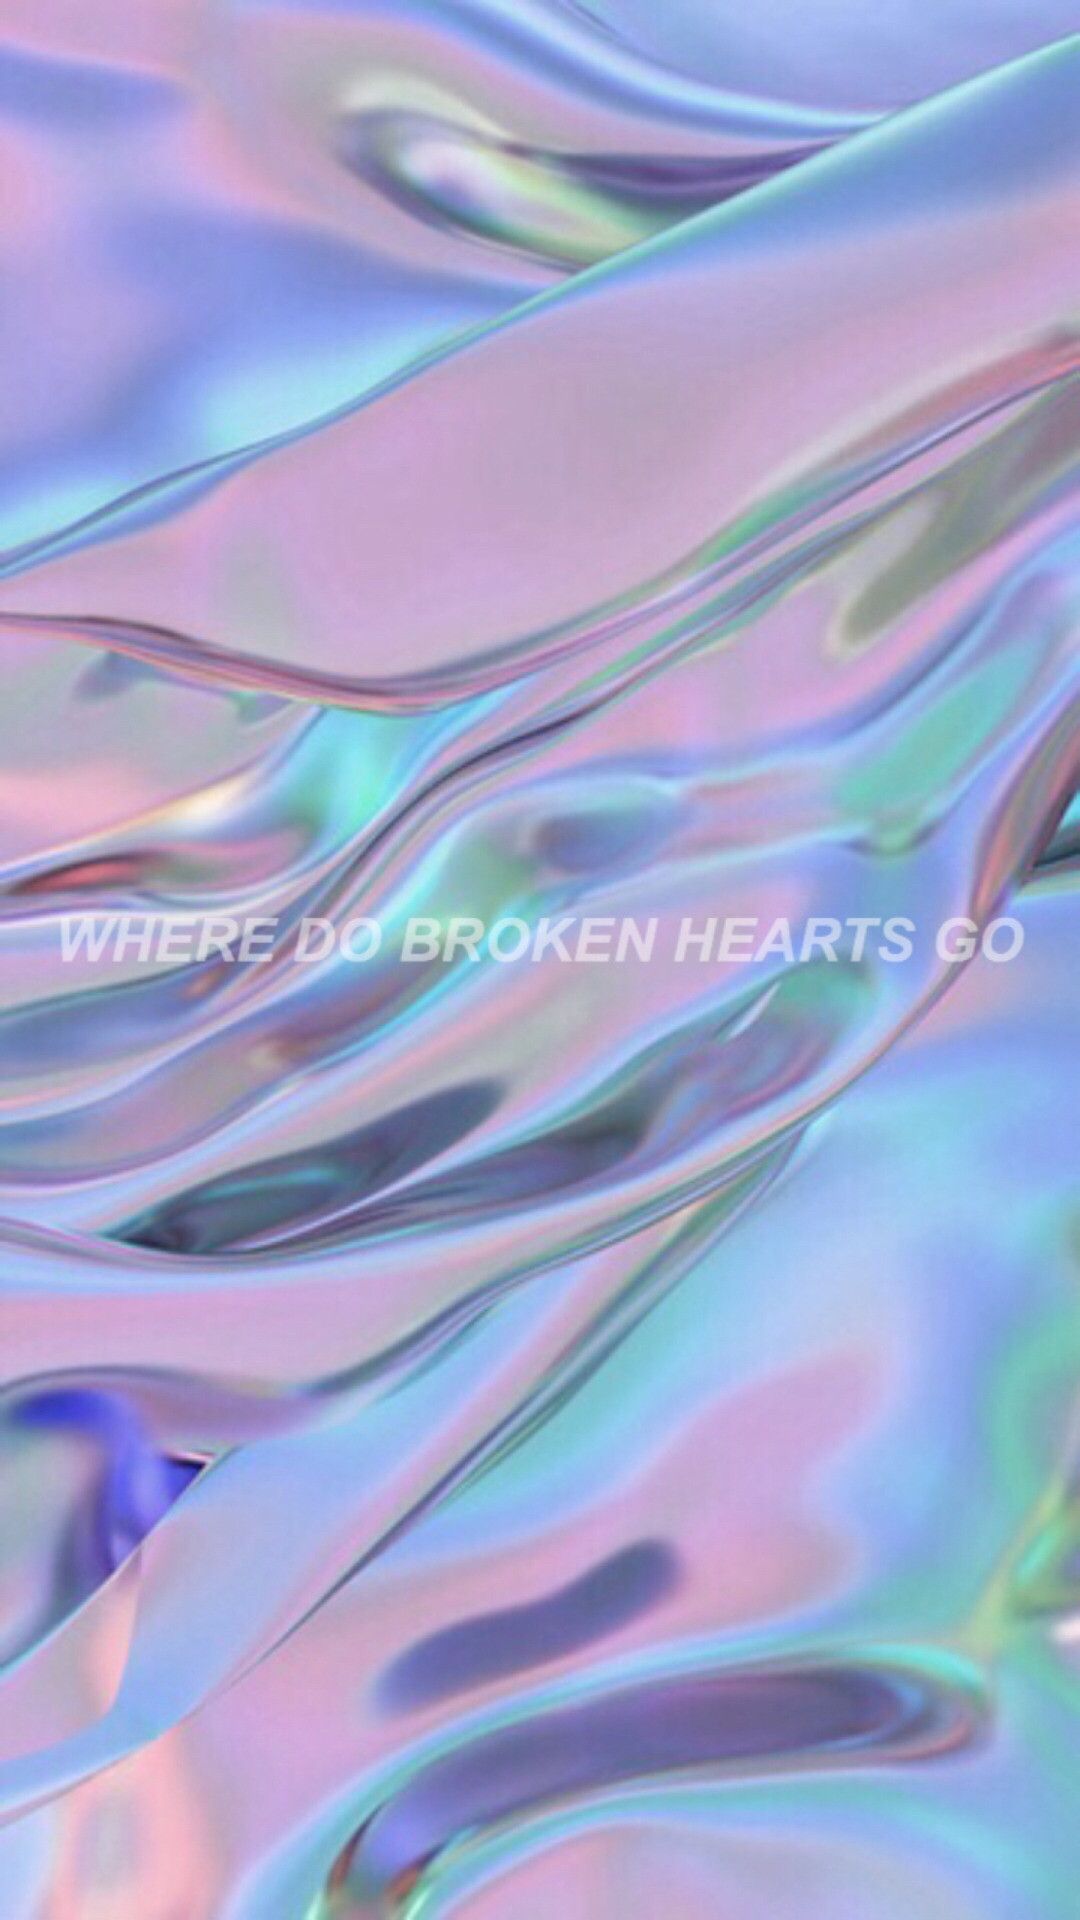 The cover for where by broken hearts go - Grunge